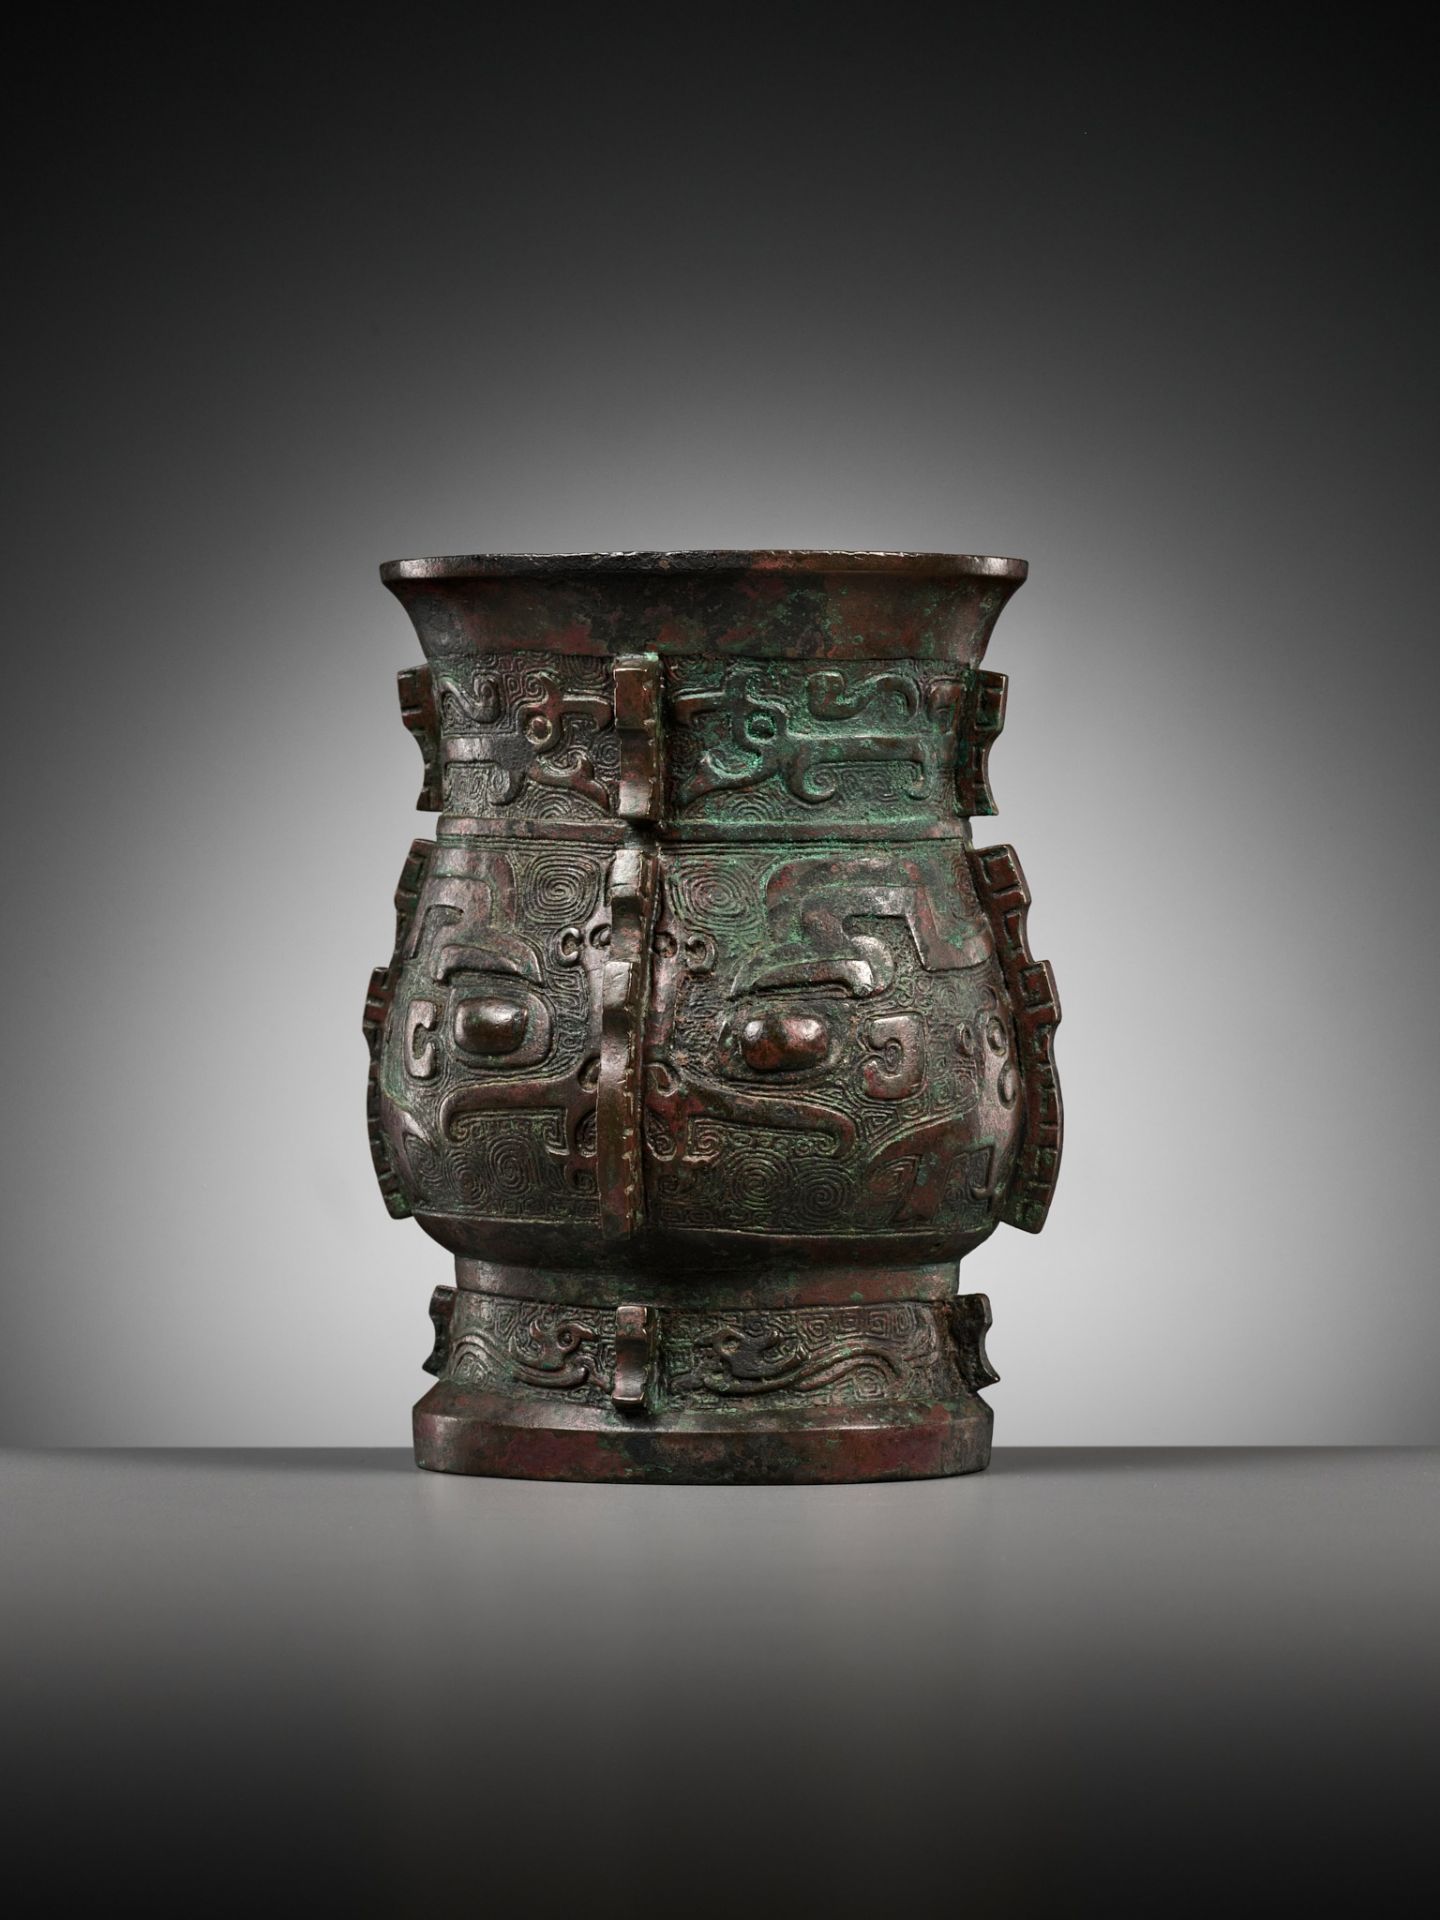 A RARE BRONZE RITUAL WINE VESSEL, ZHI, SHANG DYNASTY, CHINA, 13TH-12TH CENTURY BC - Image 12 of 25